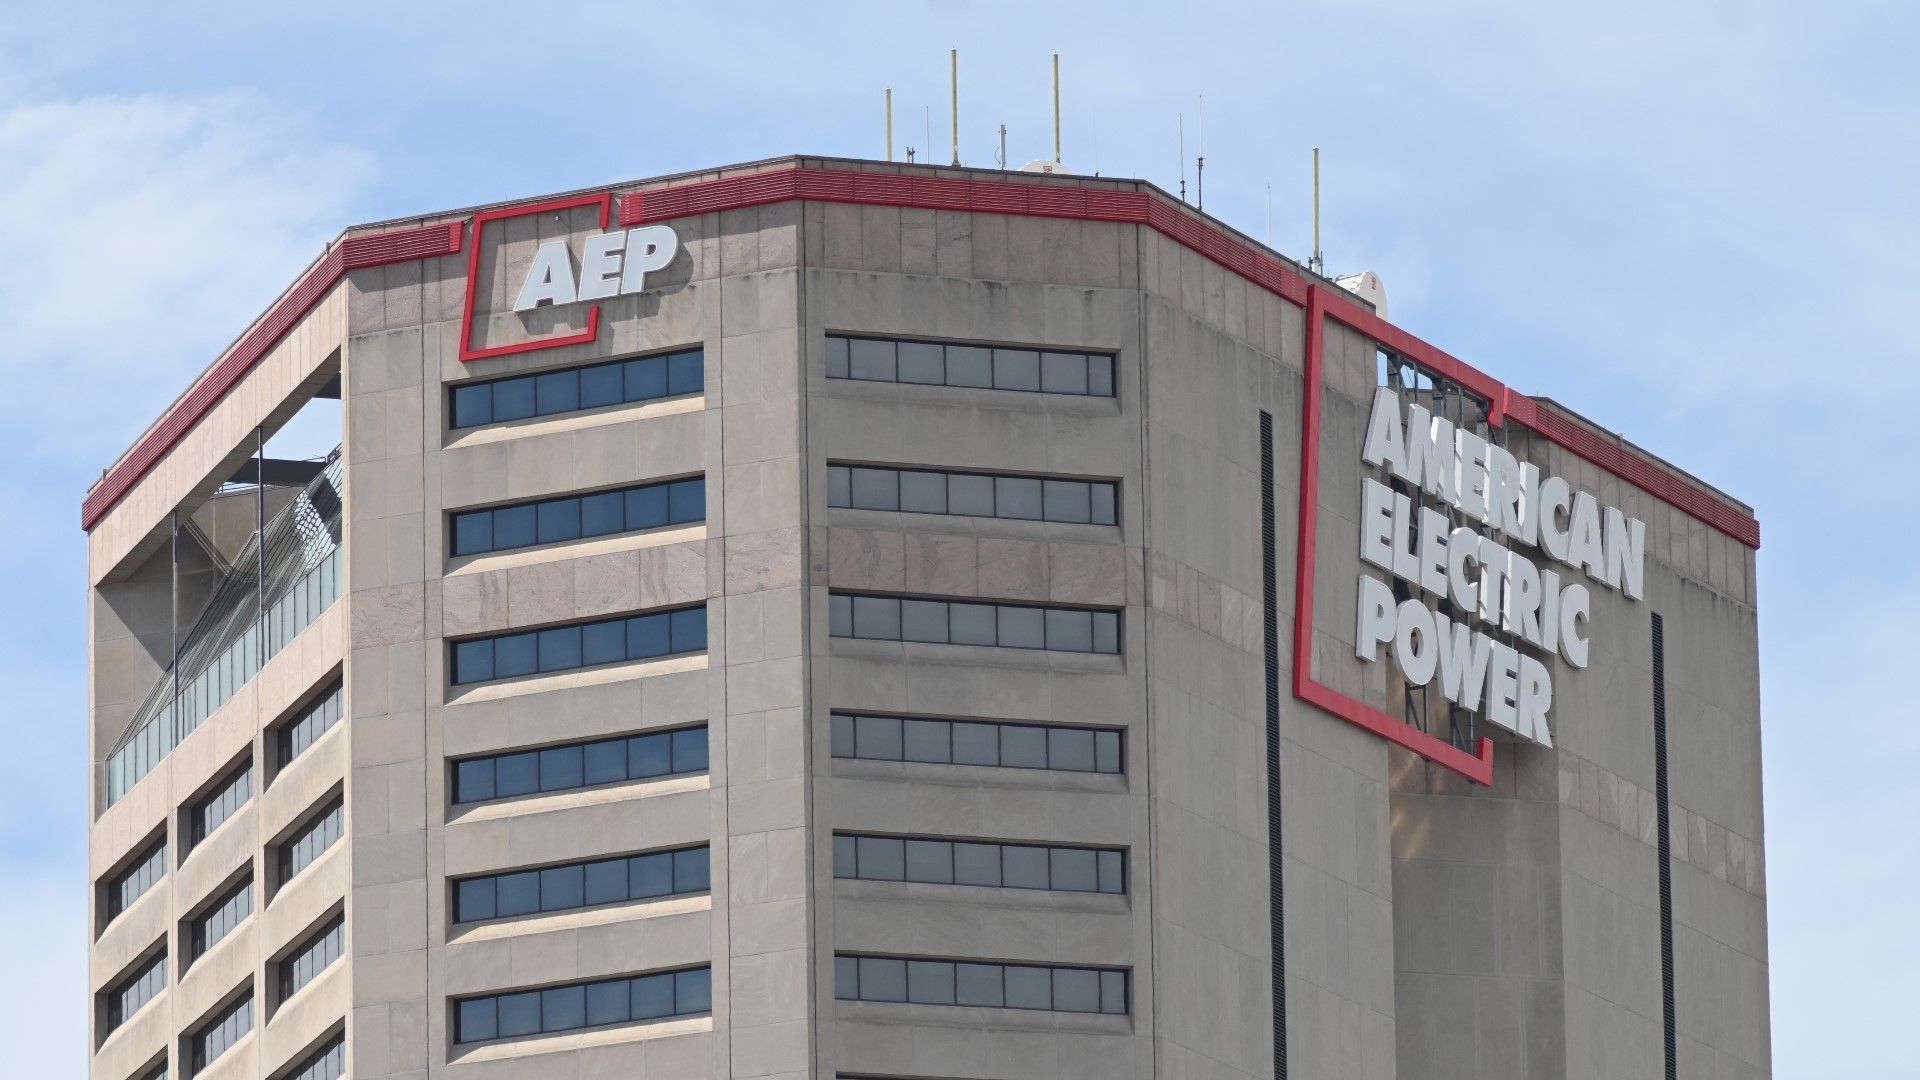 The chair of the Public Utilities Commission of Ohio said that her agency will conduct a post incident review of AEP Ohio’s decision to purposefully cut off power.